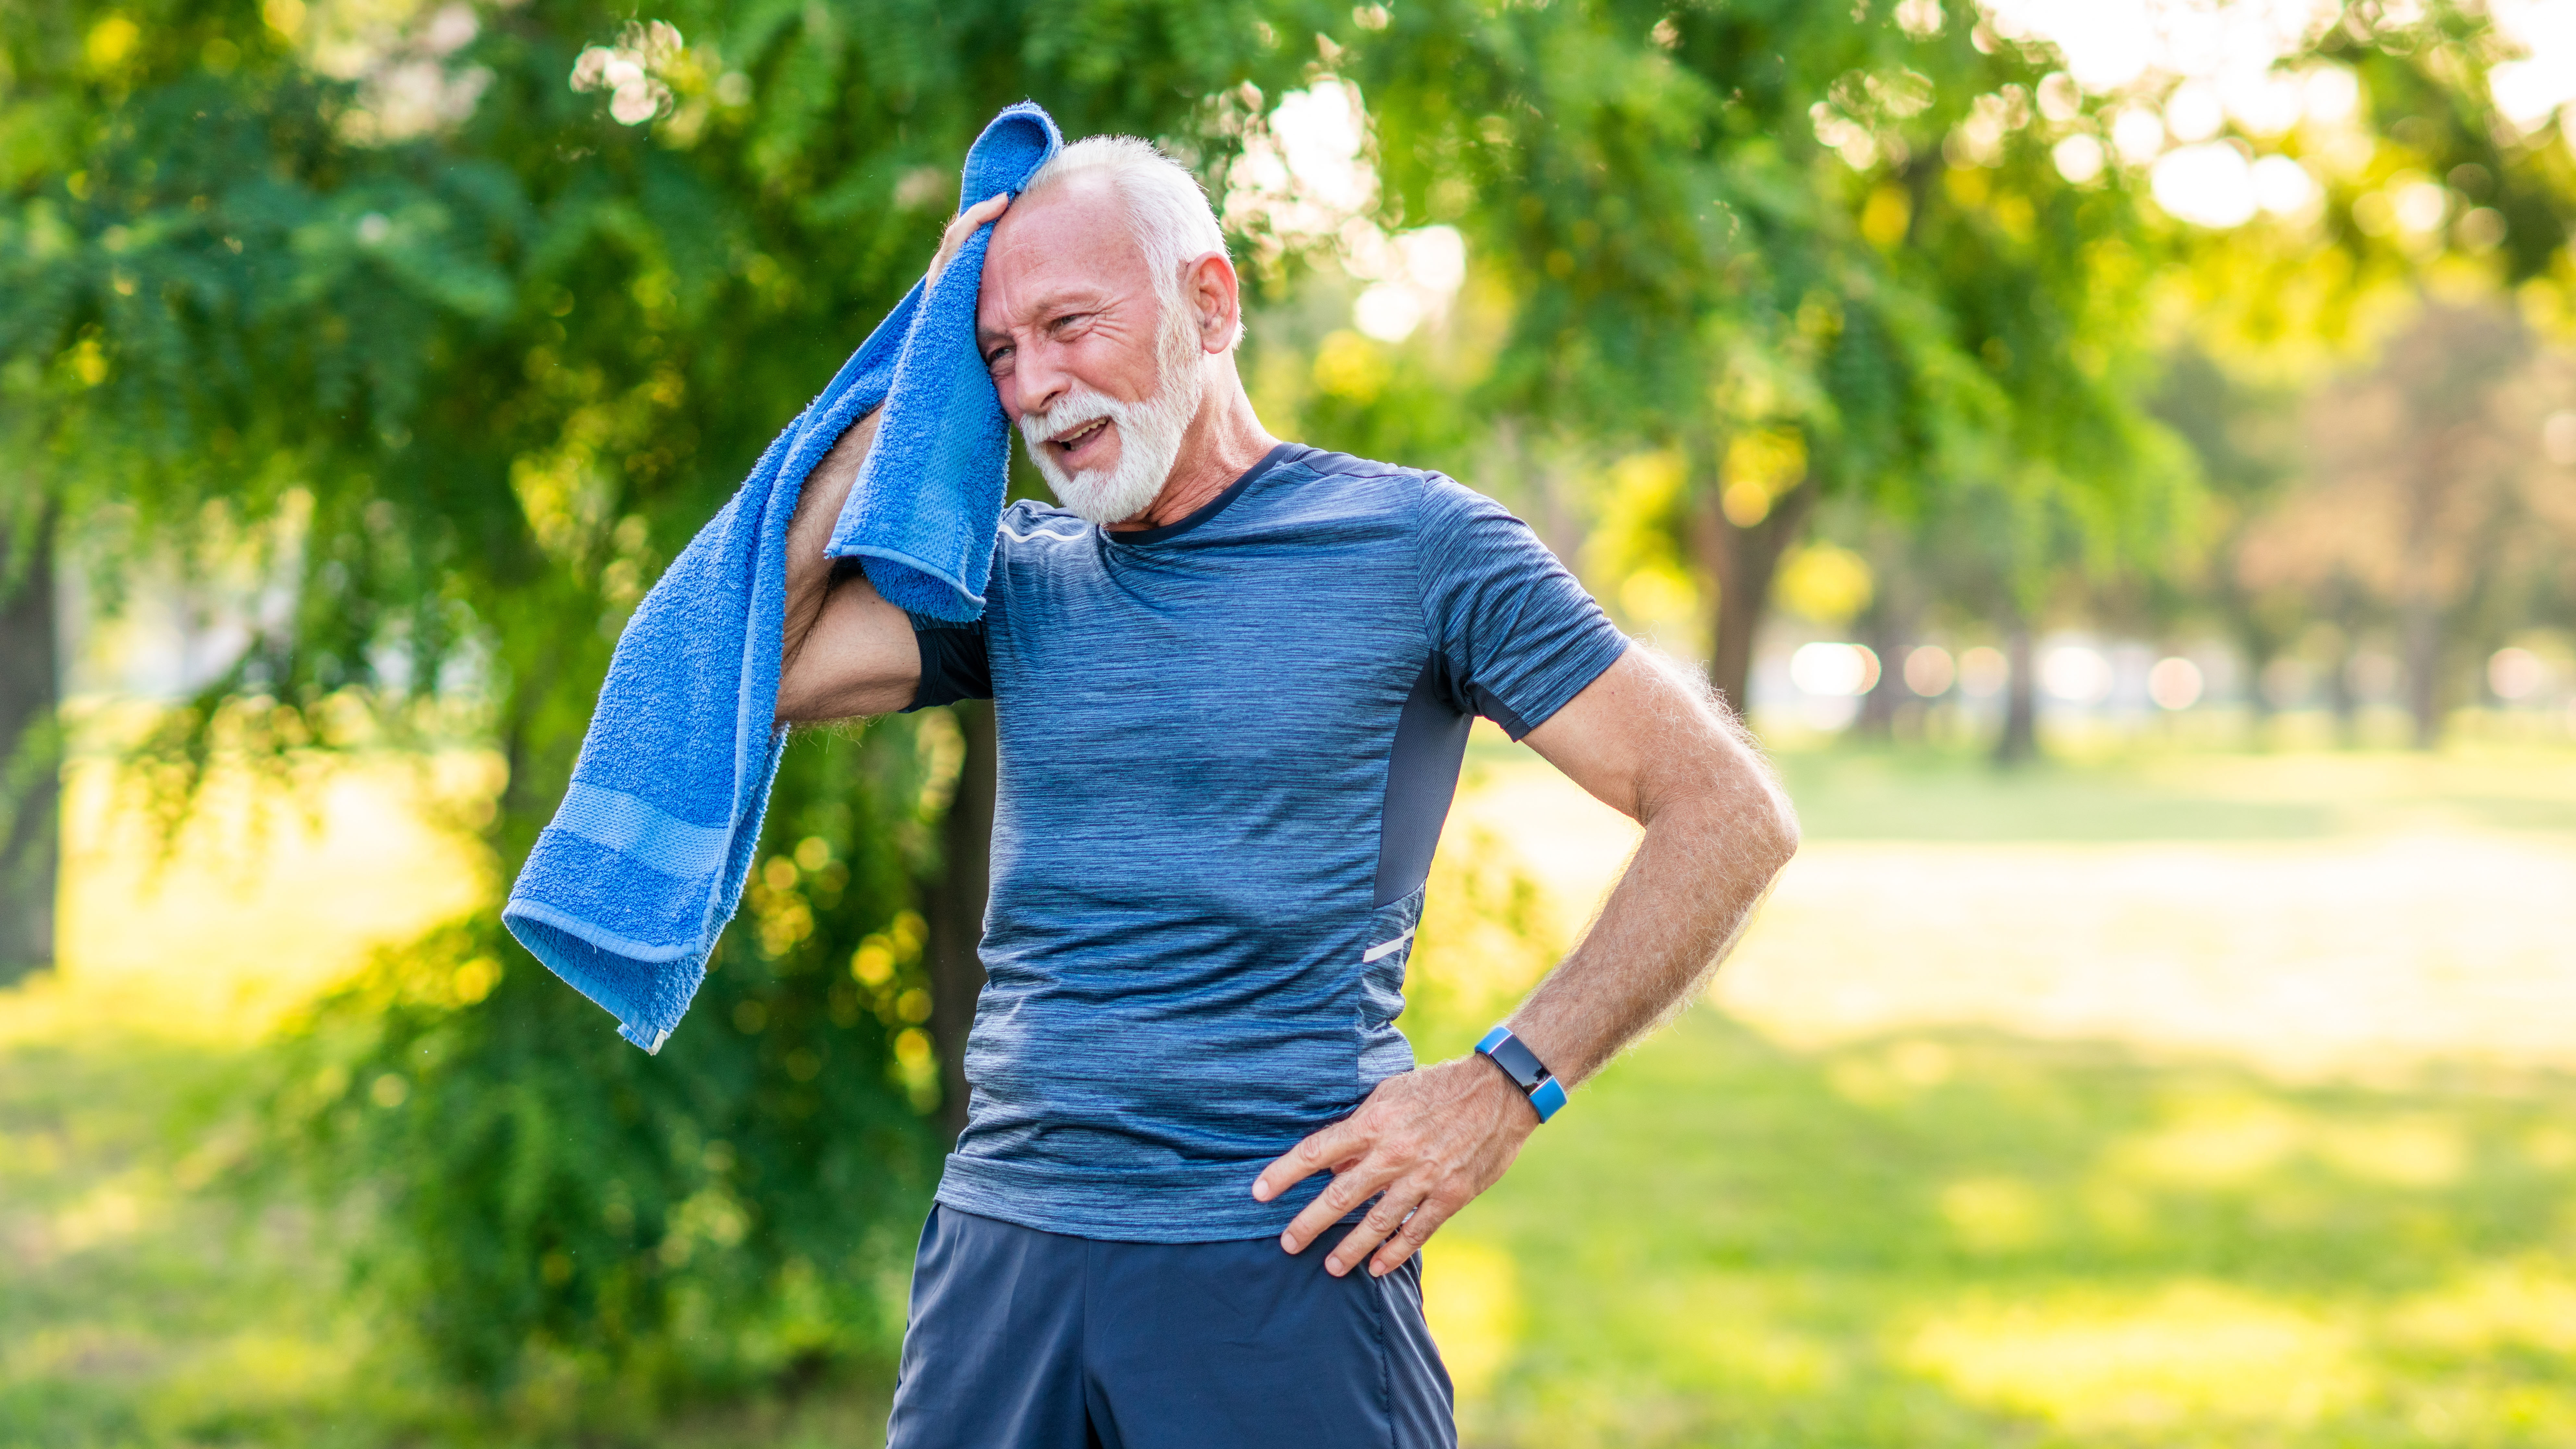 Older man wiping brow after exercising in park